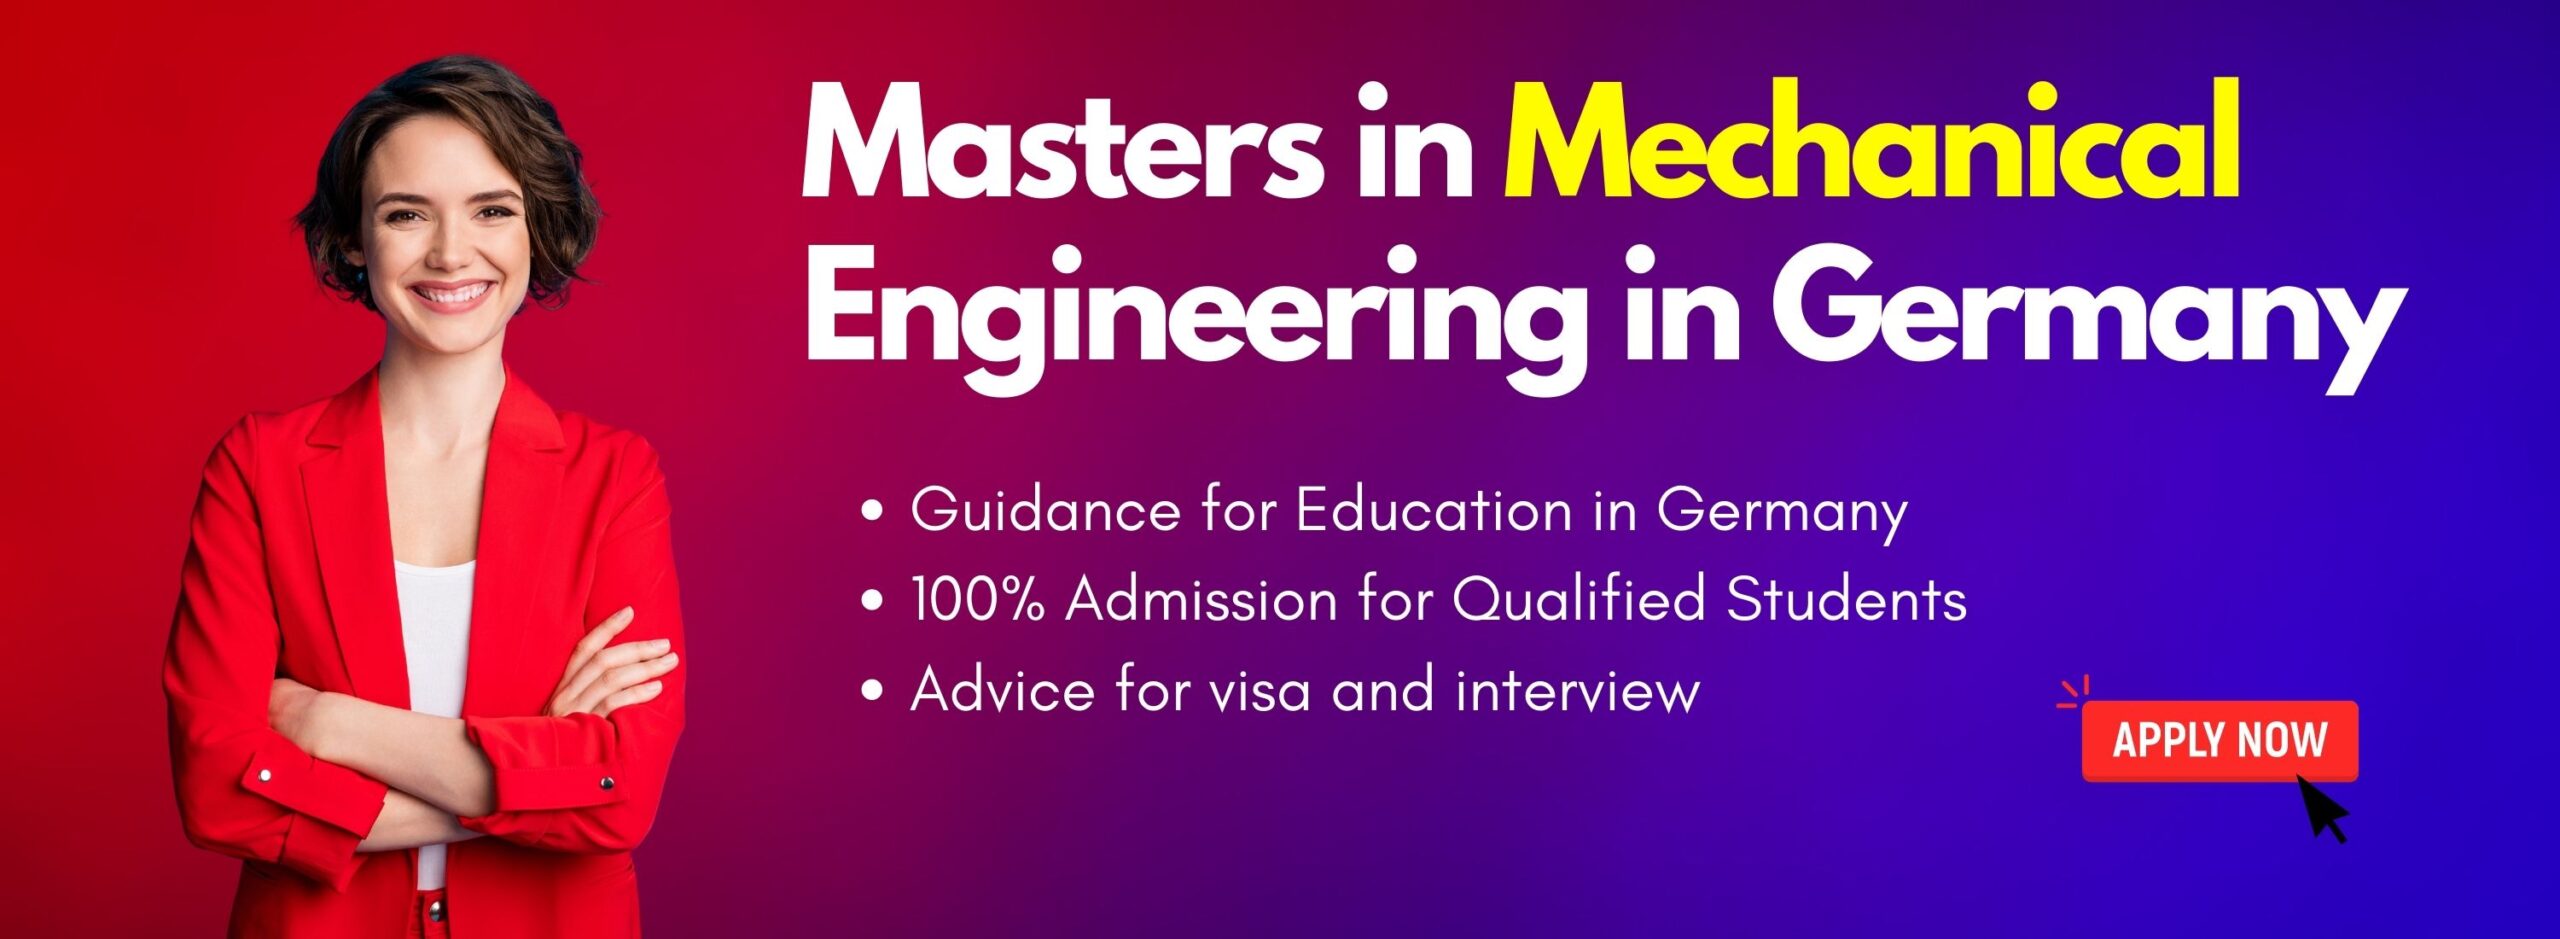 Masters in Mechanical Engineering in Germany - Learn More